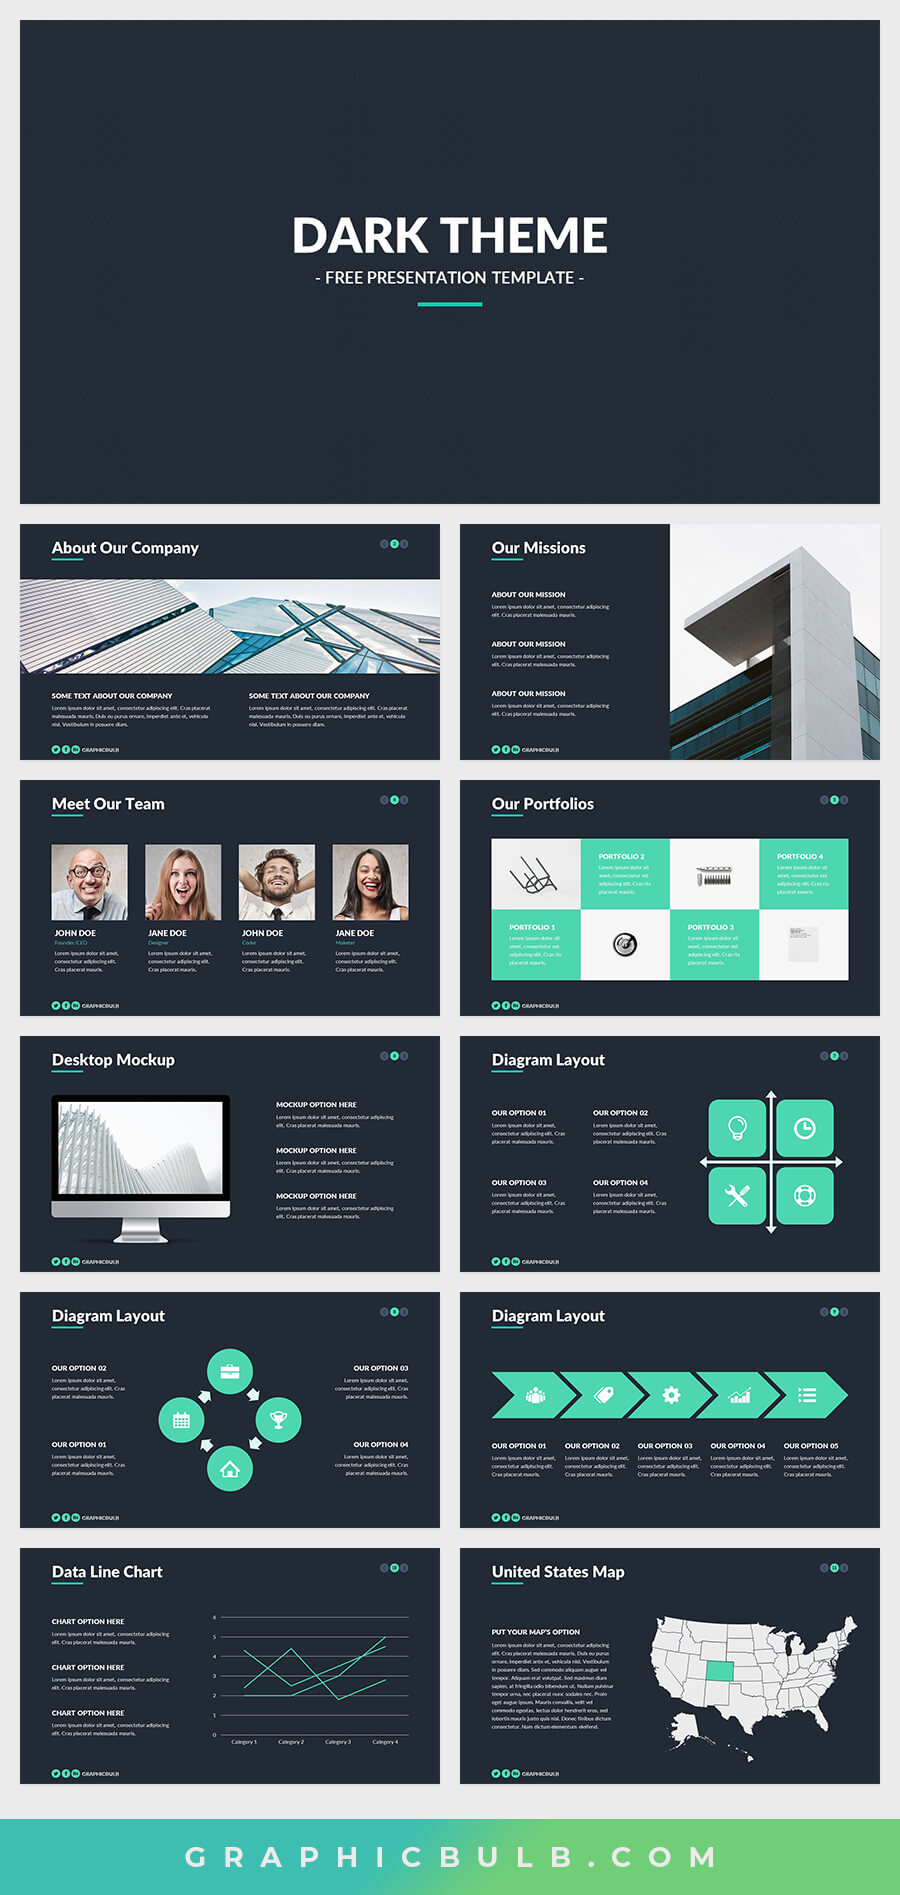 Dark Theme Free Powerpoint Template With Powerpoint Photo Slideshow Template